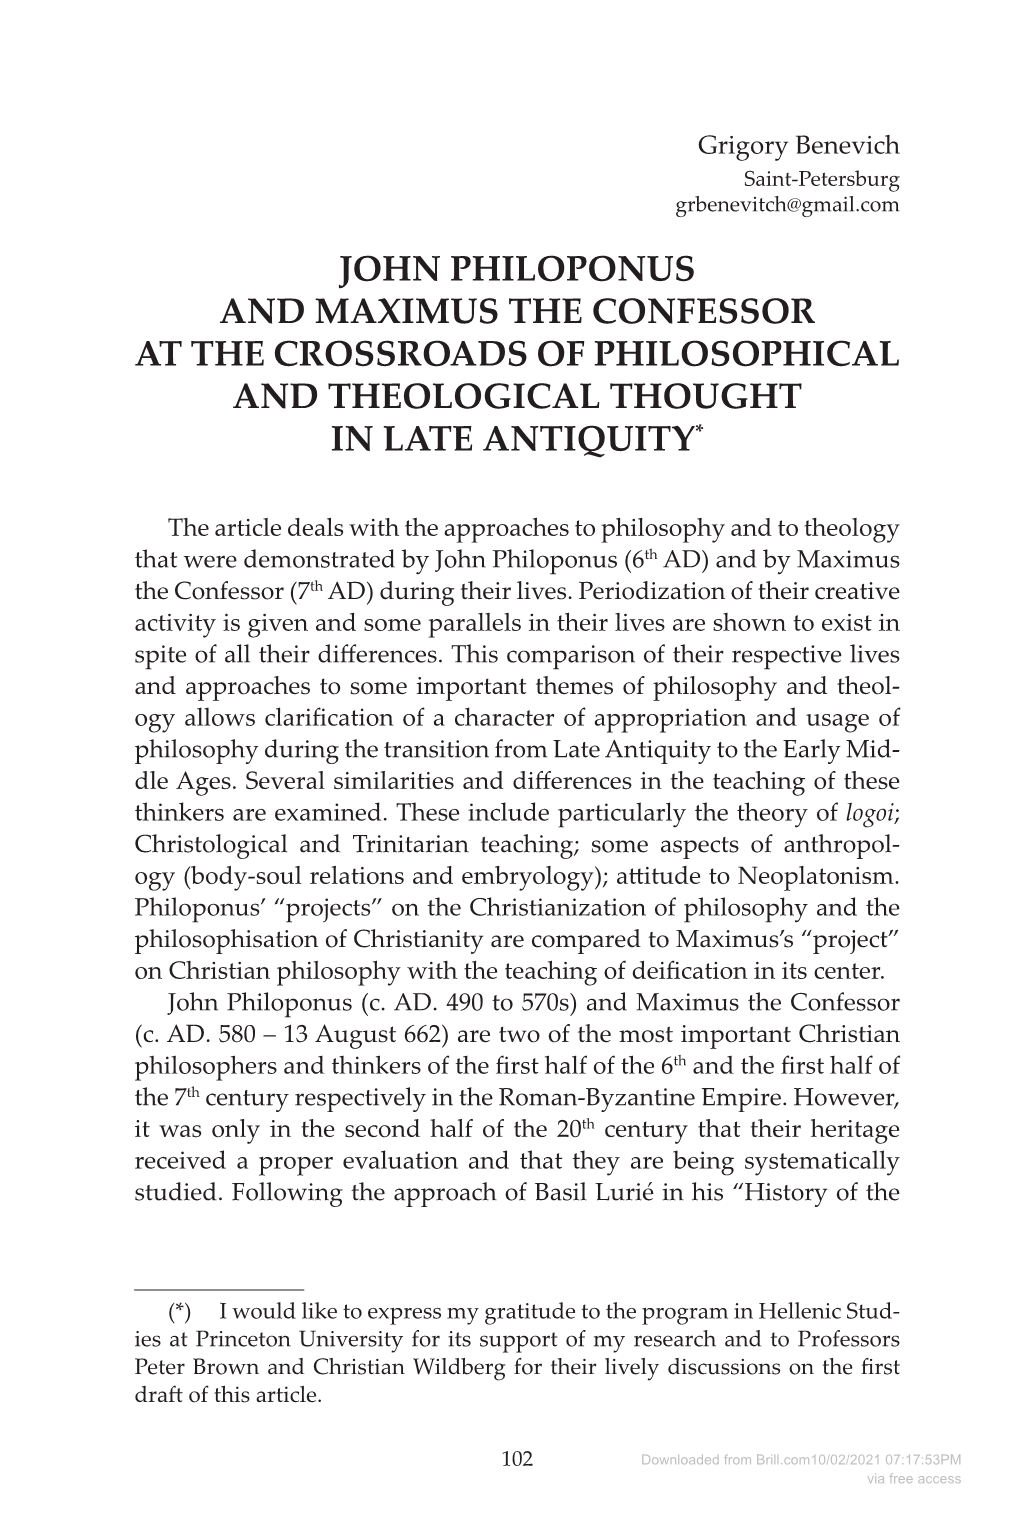 John Philoponus and Maximus the Confessor at the Crossroads of Philosophical and Theological Thought in Late Antiquity*